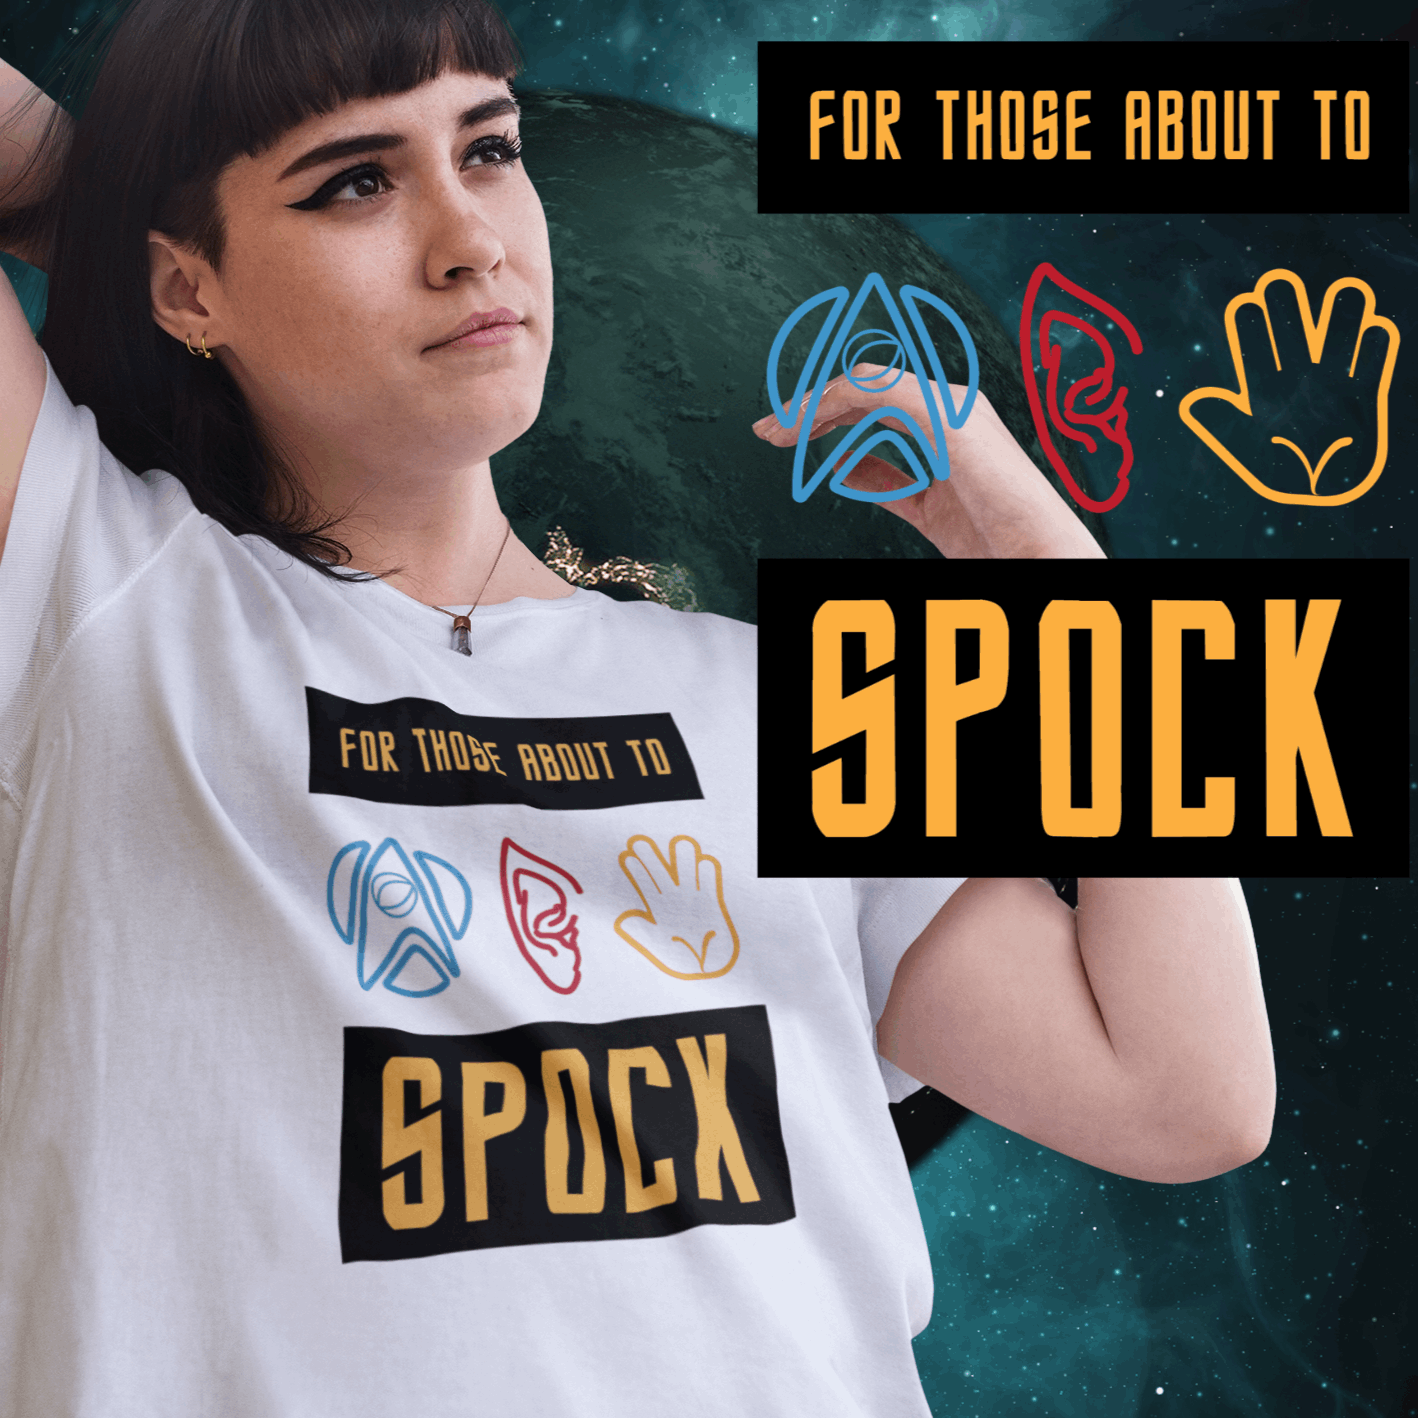 About to Spock tee